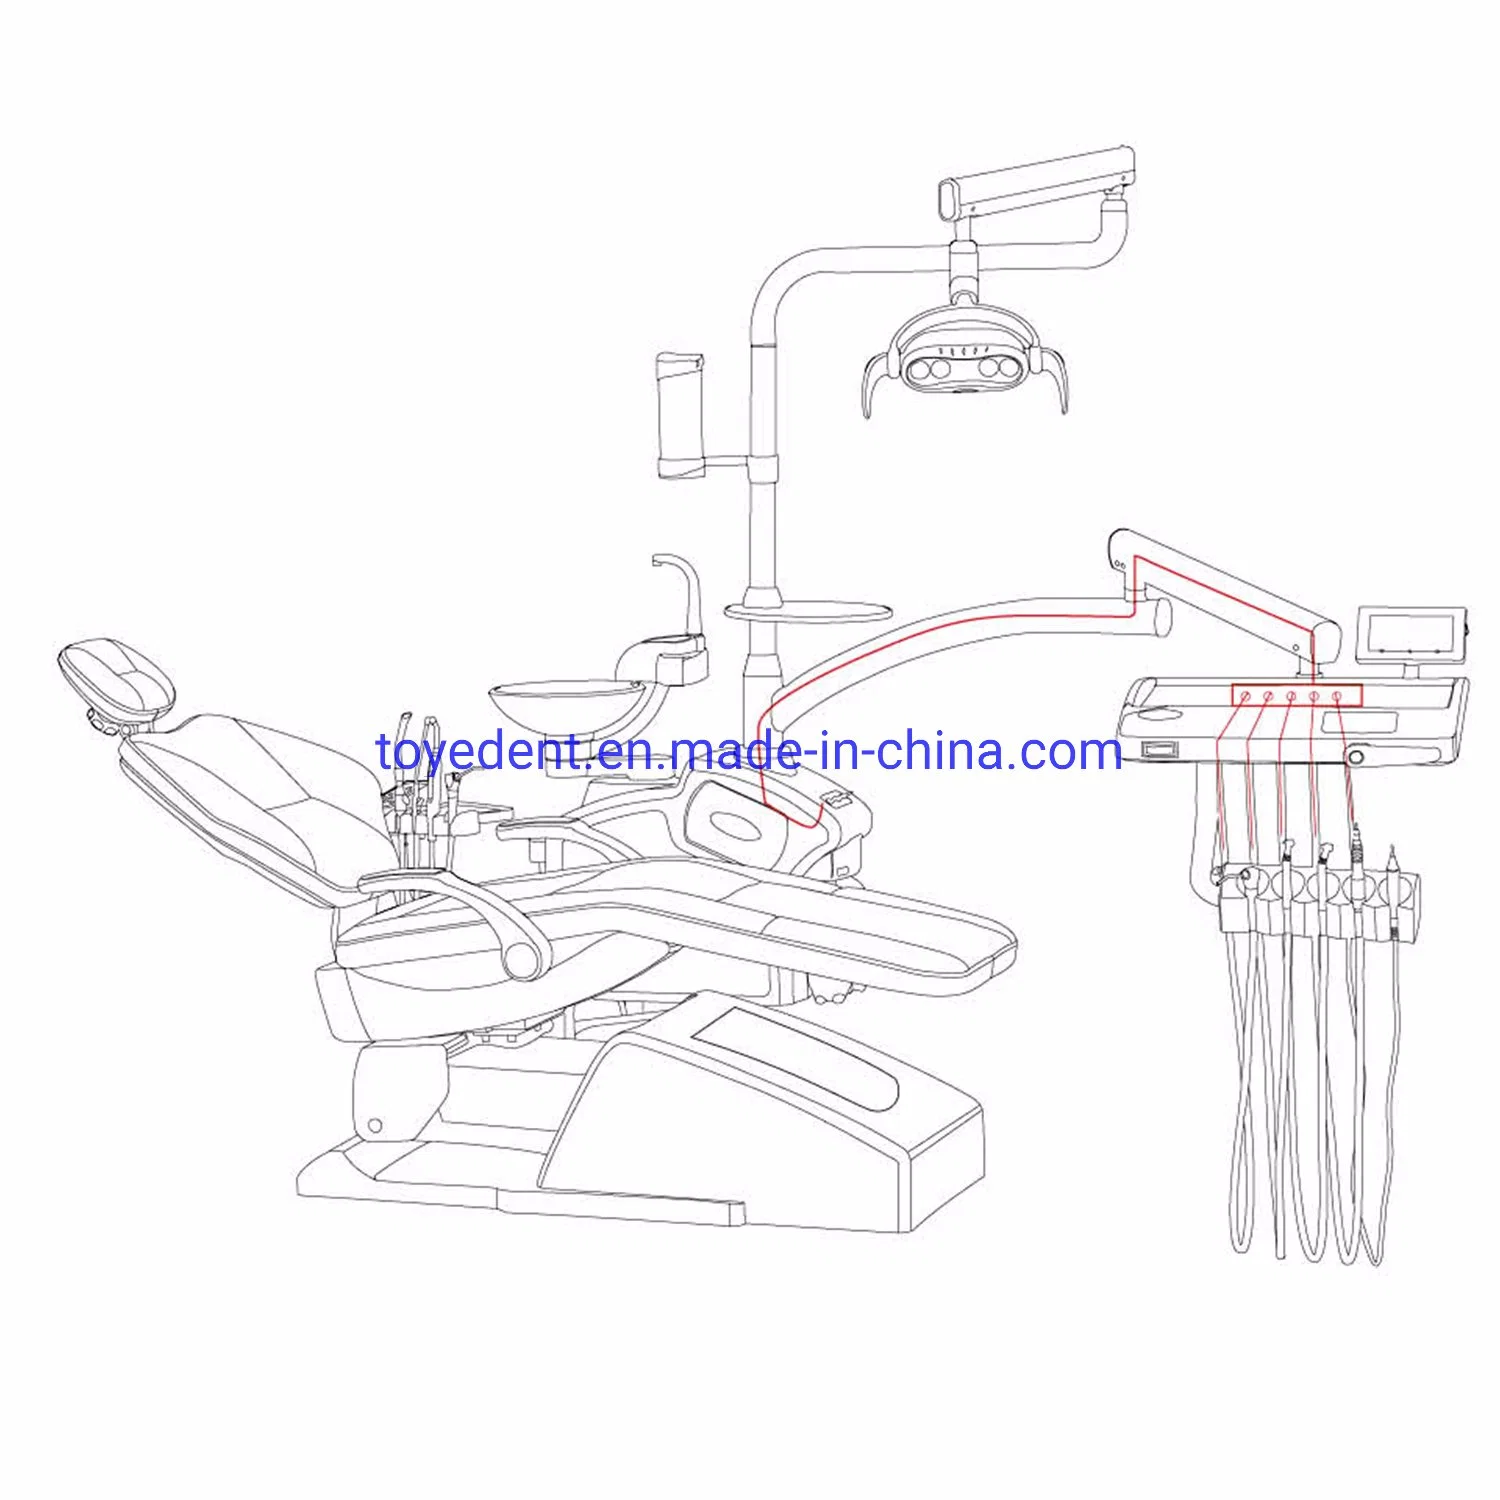 Best Selling Medical Dental Chair Unit with Dentist Stool